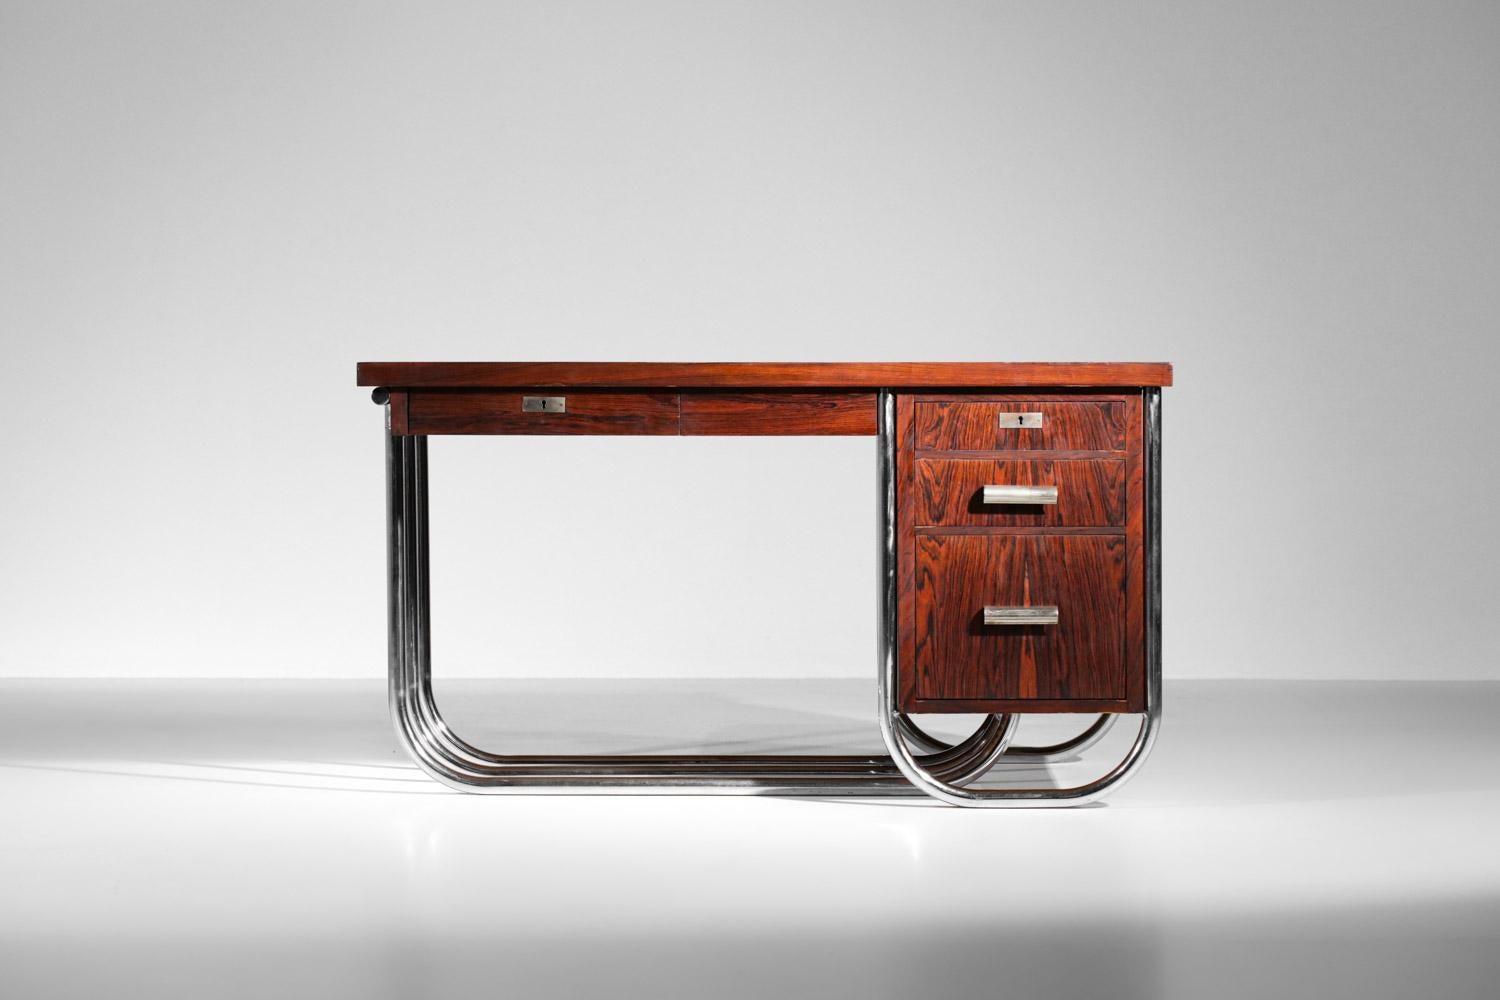 Mid-20th Century Modernist Desk in Solid Wood 40s / 50s Bauhaus Style Vintage For Sale